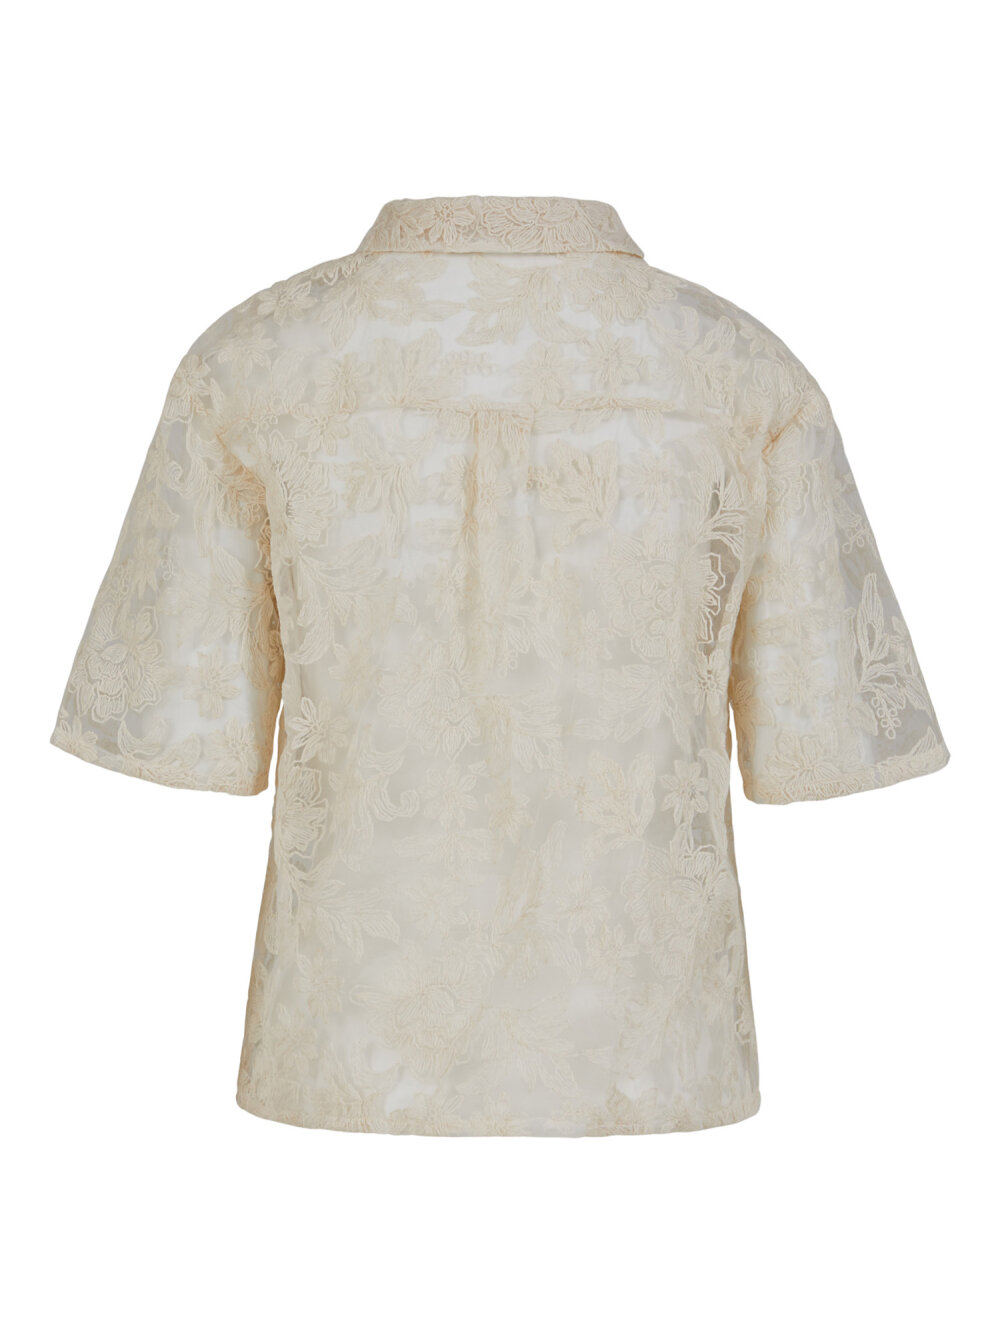 Coster Copenhagen - Shirt With Lace 